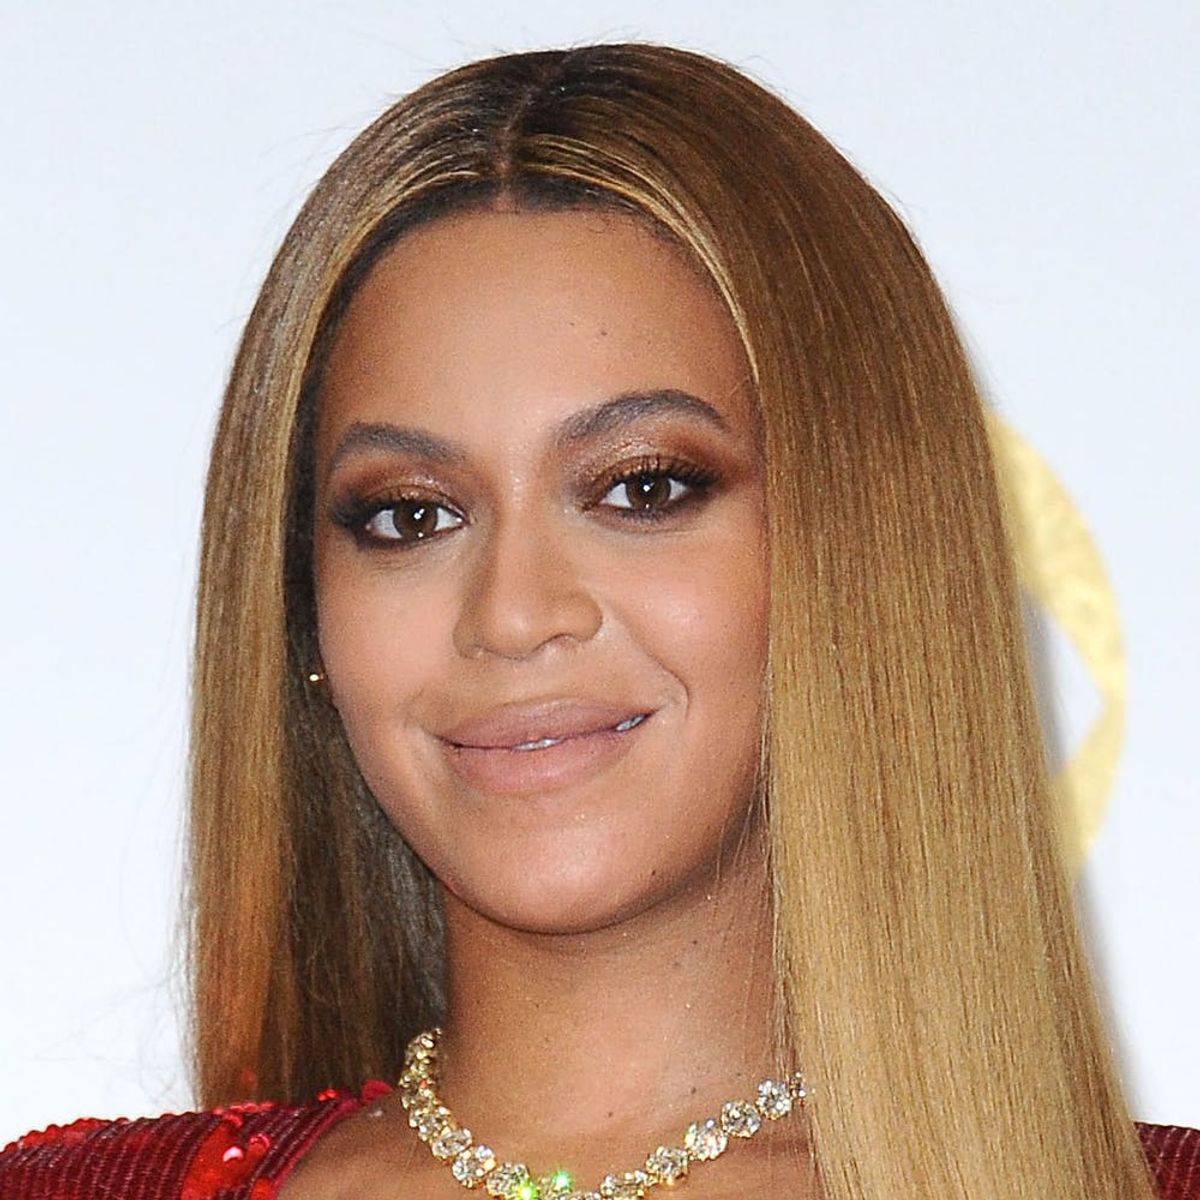 Beyoncé Flaunts Post-Baby Body in This Super Affordable Dress